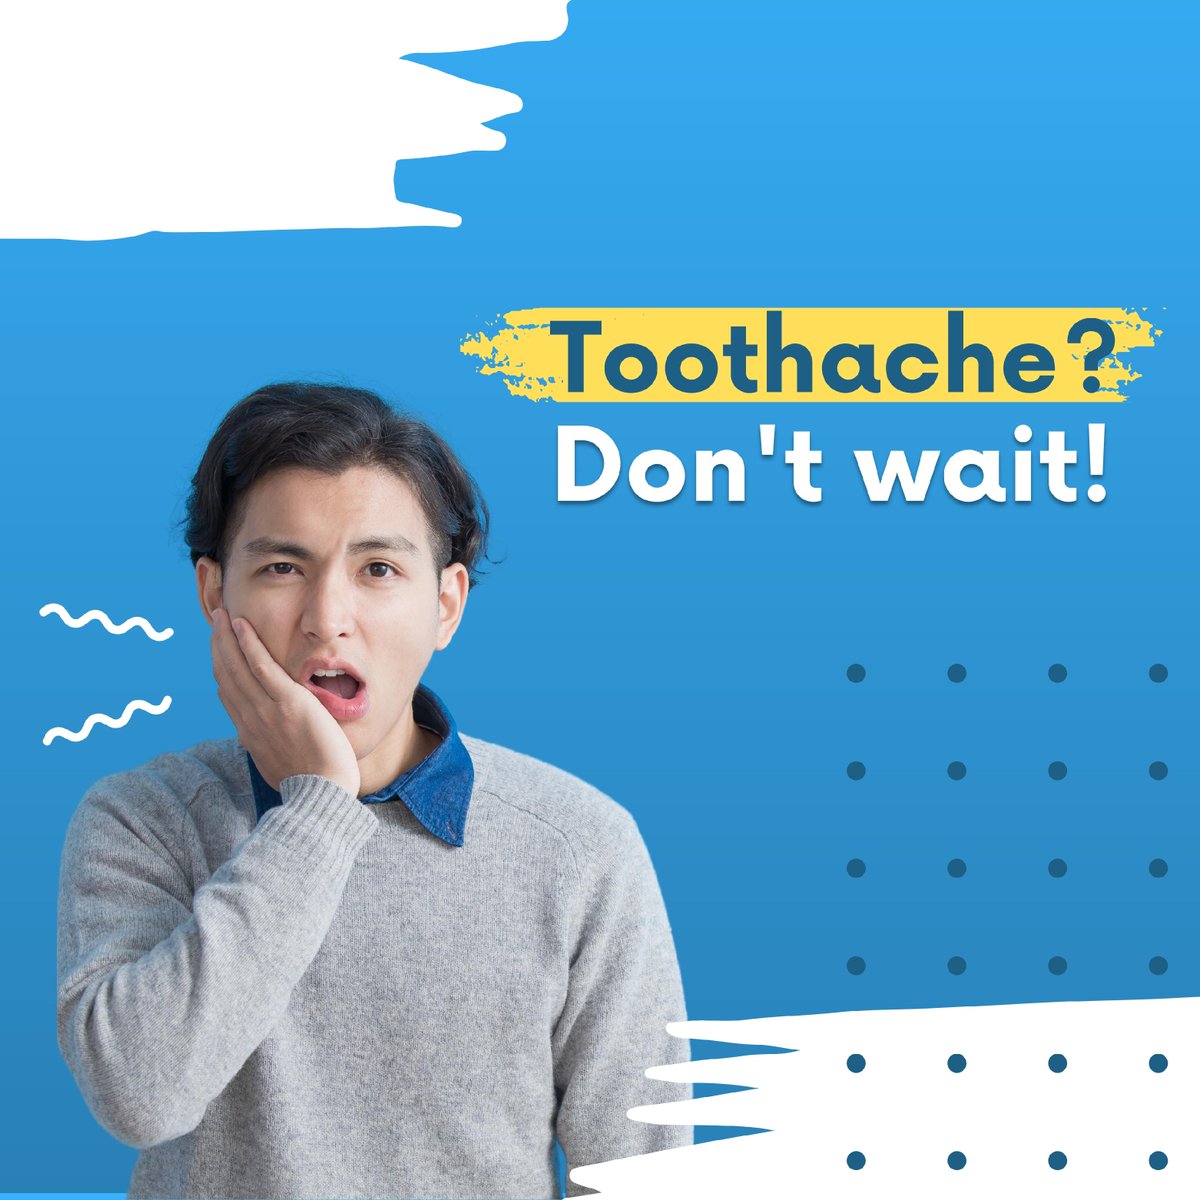 🦷 If you are experiencing any kind of tooth pain, please don't wait to give us a call! It could be something more serious so lets get it taken care of right away. #toothache #DontWait